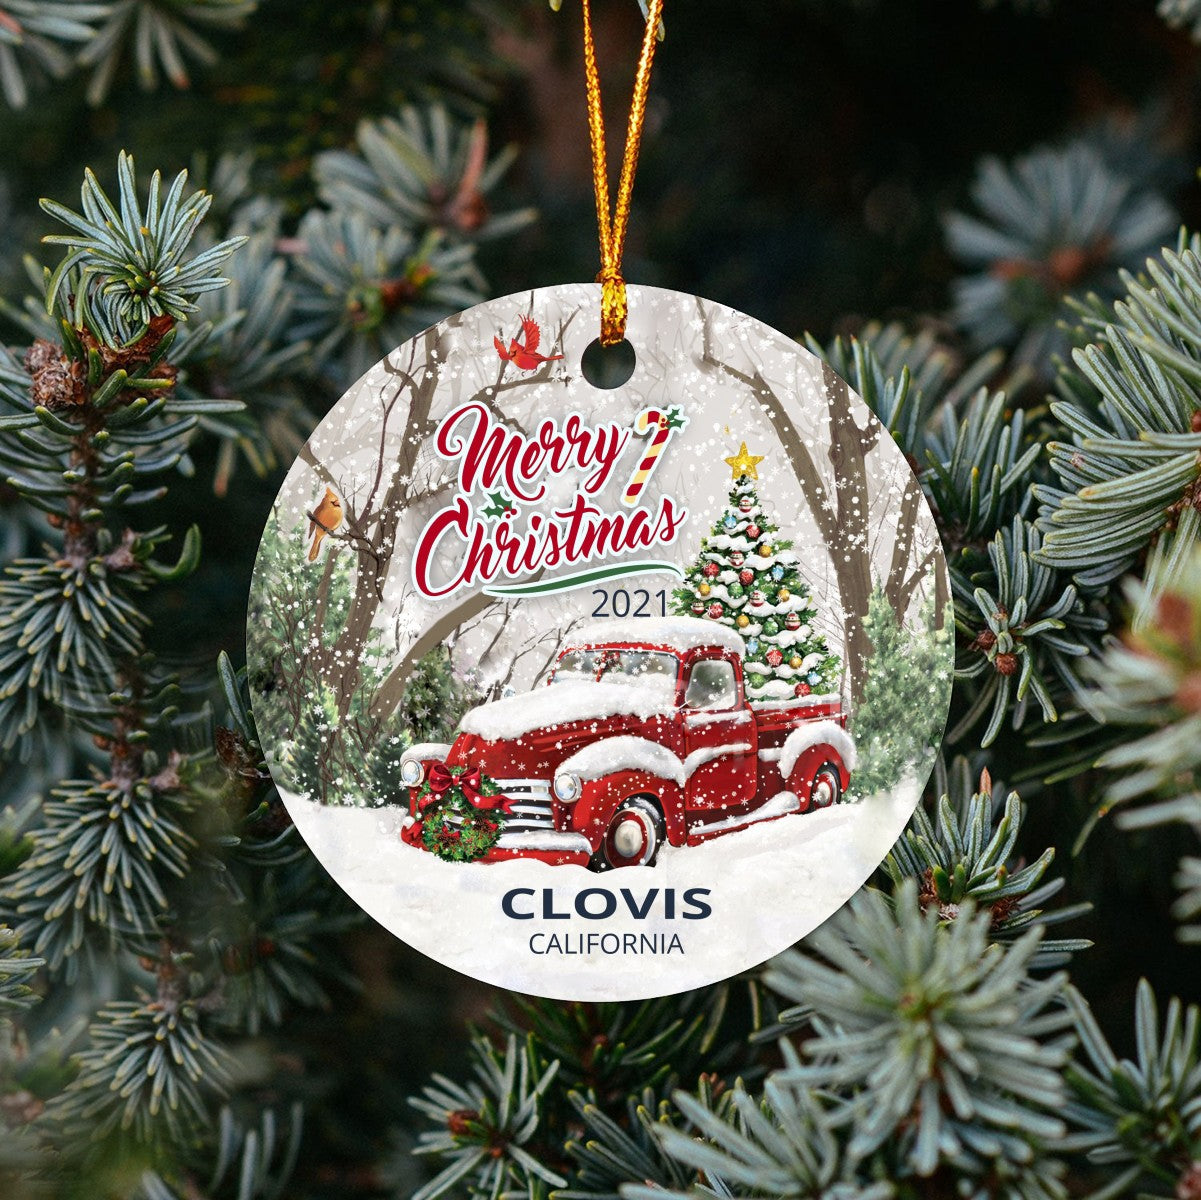 Christmas Tree Ornaments Clovis - Ornament Customize With Name City And State Clovis California CA - Red Truck Xmas Ornaments 3'' Plastic Gift For Family, Friend And Housewarming